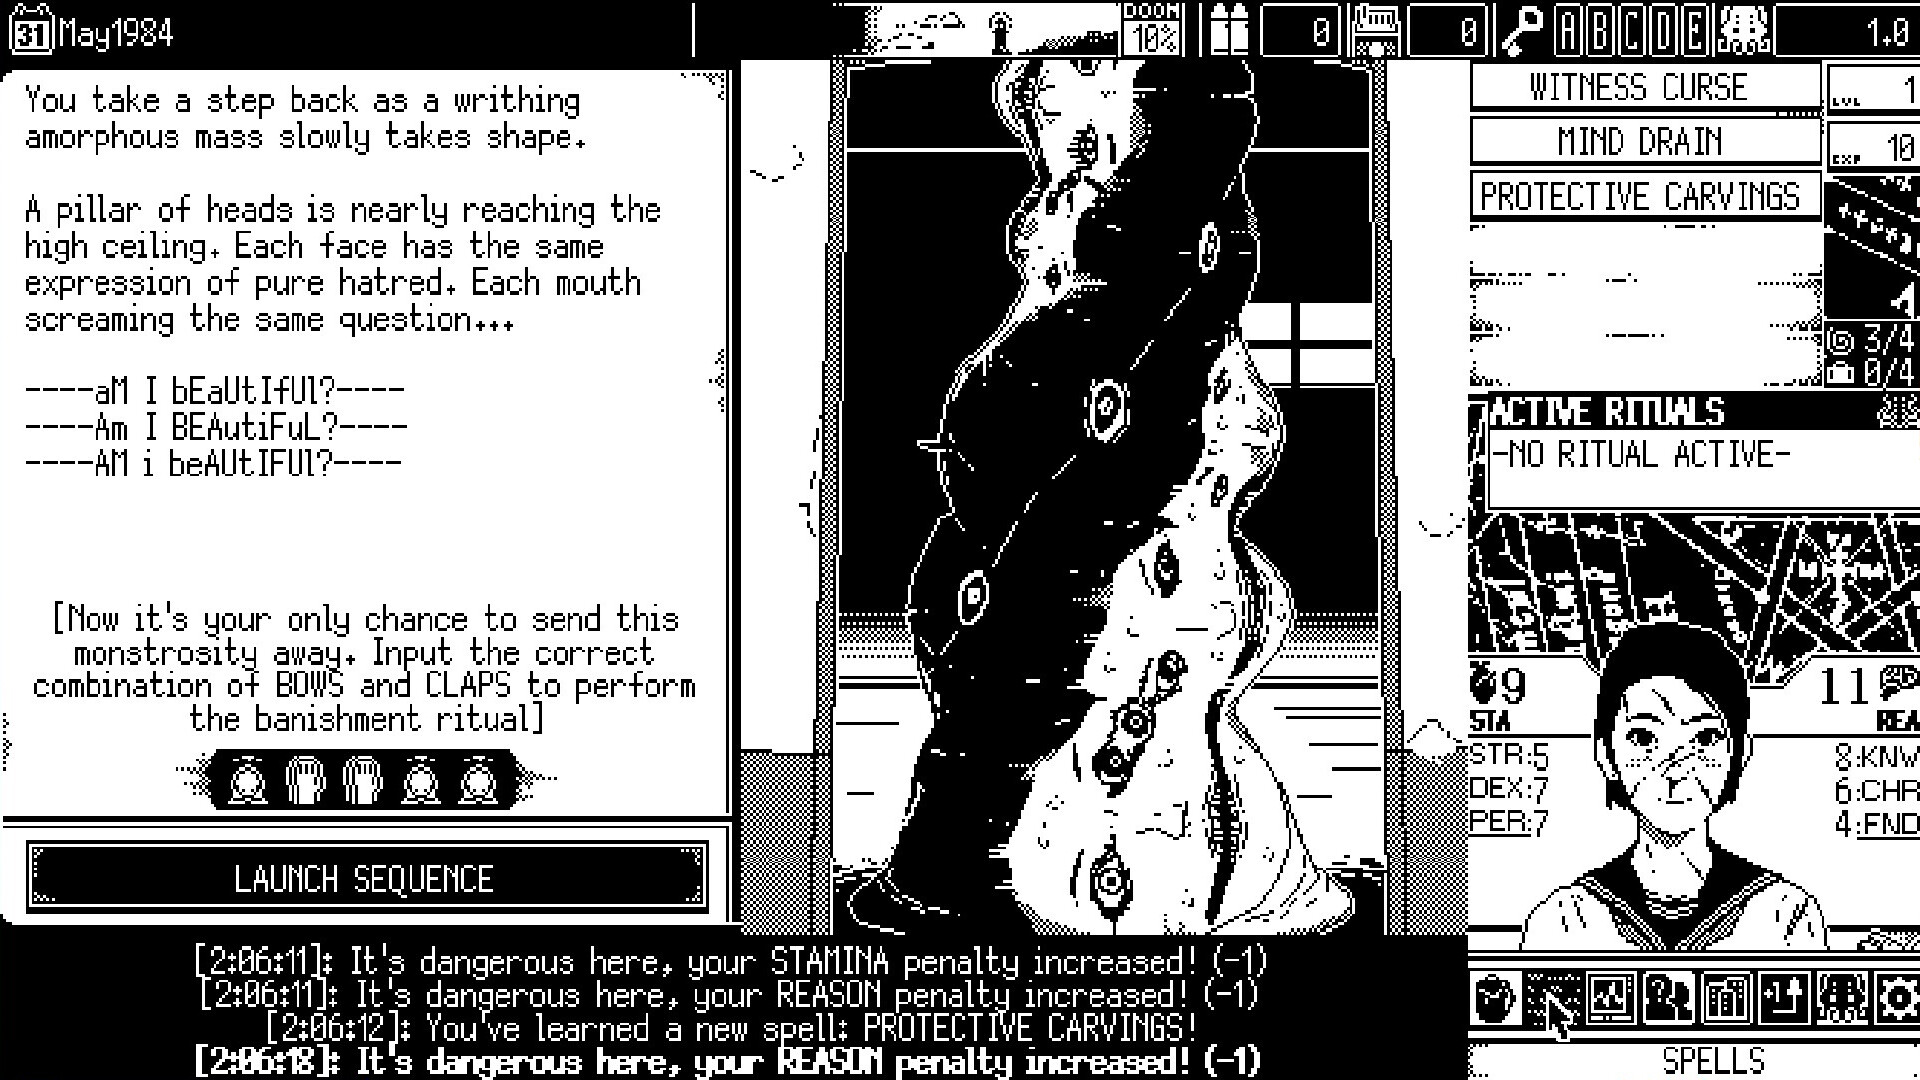 World of Horror, a creepy 1-bit style horror RPG, will release next month